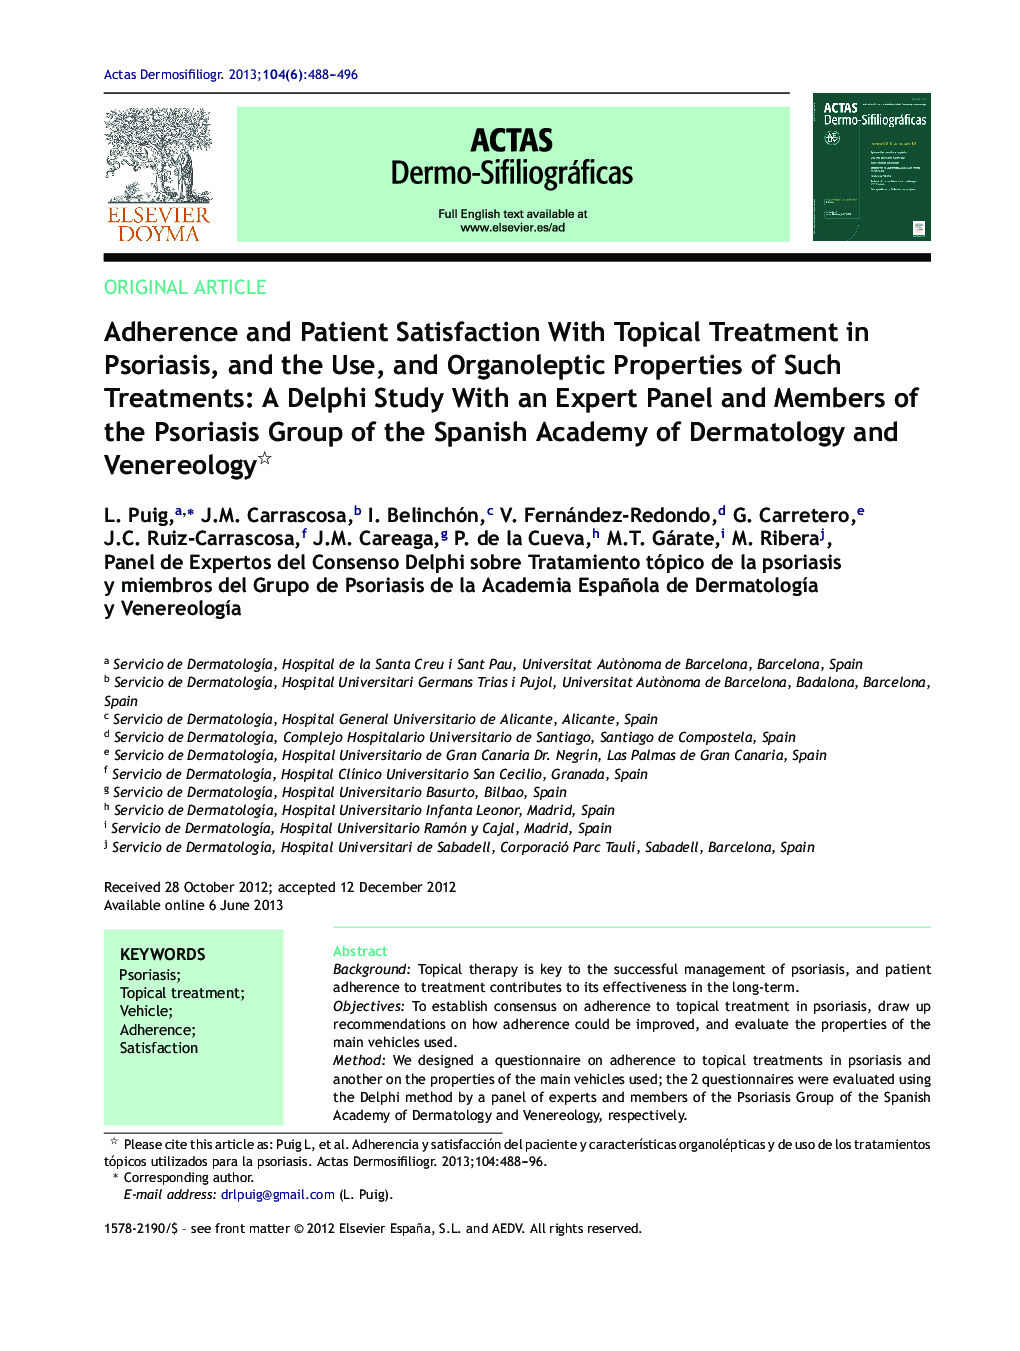 Adherence and Patient Satisfaction With Topical Treatment in Psoriasis, and the Use, and Organoleptic Properties of Such Treatments: A Delphi Study With an Expert Panel and Members of the Psoriasis Group of the Spanish Academy of Dermatology and Venereolo